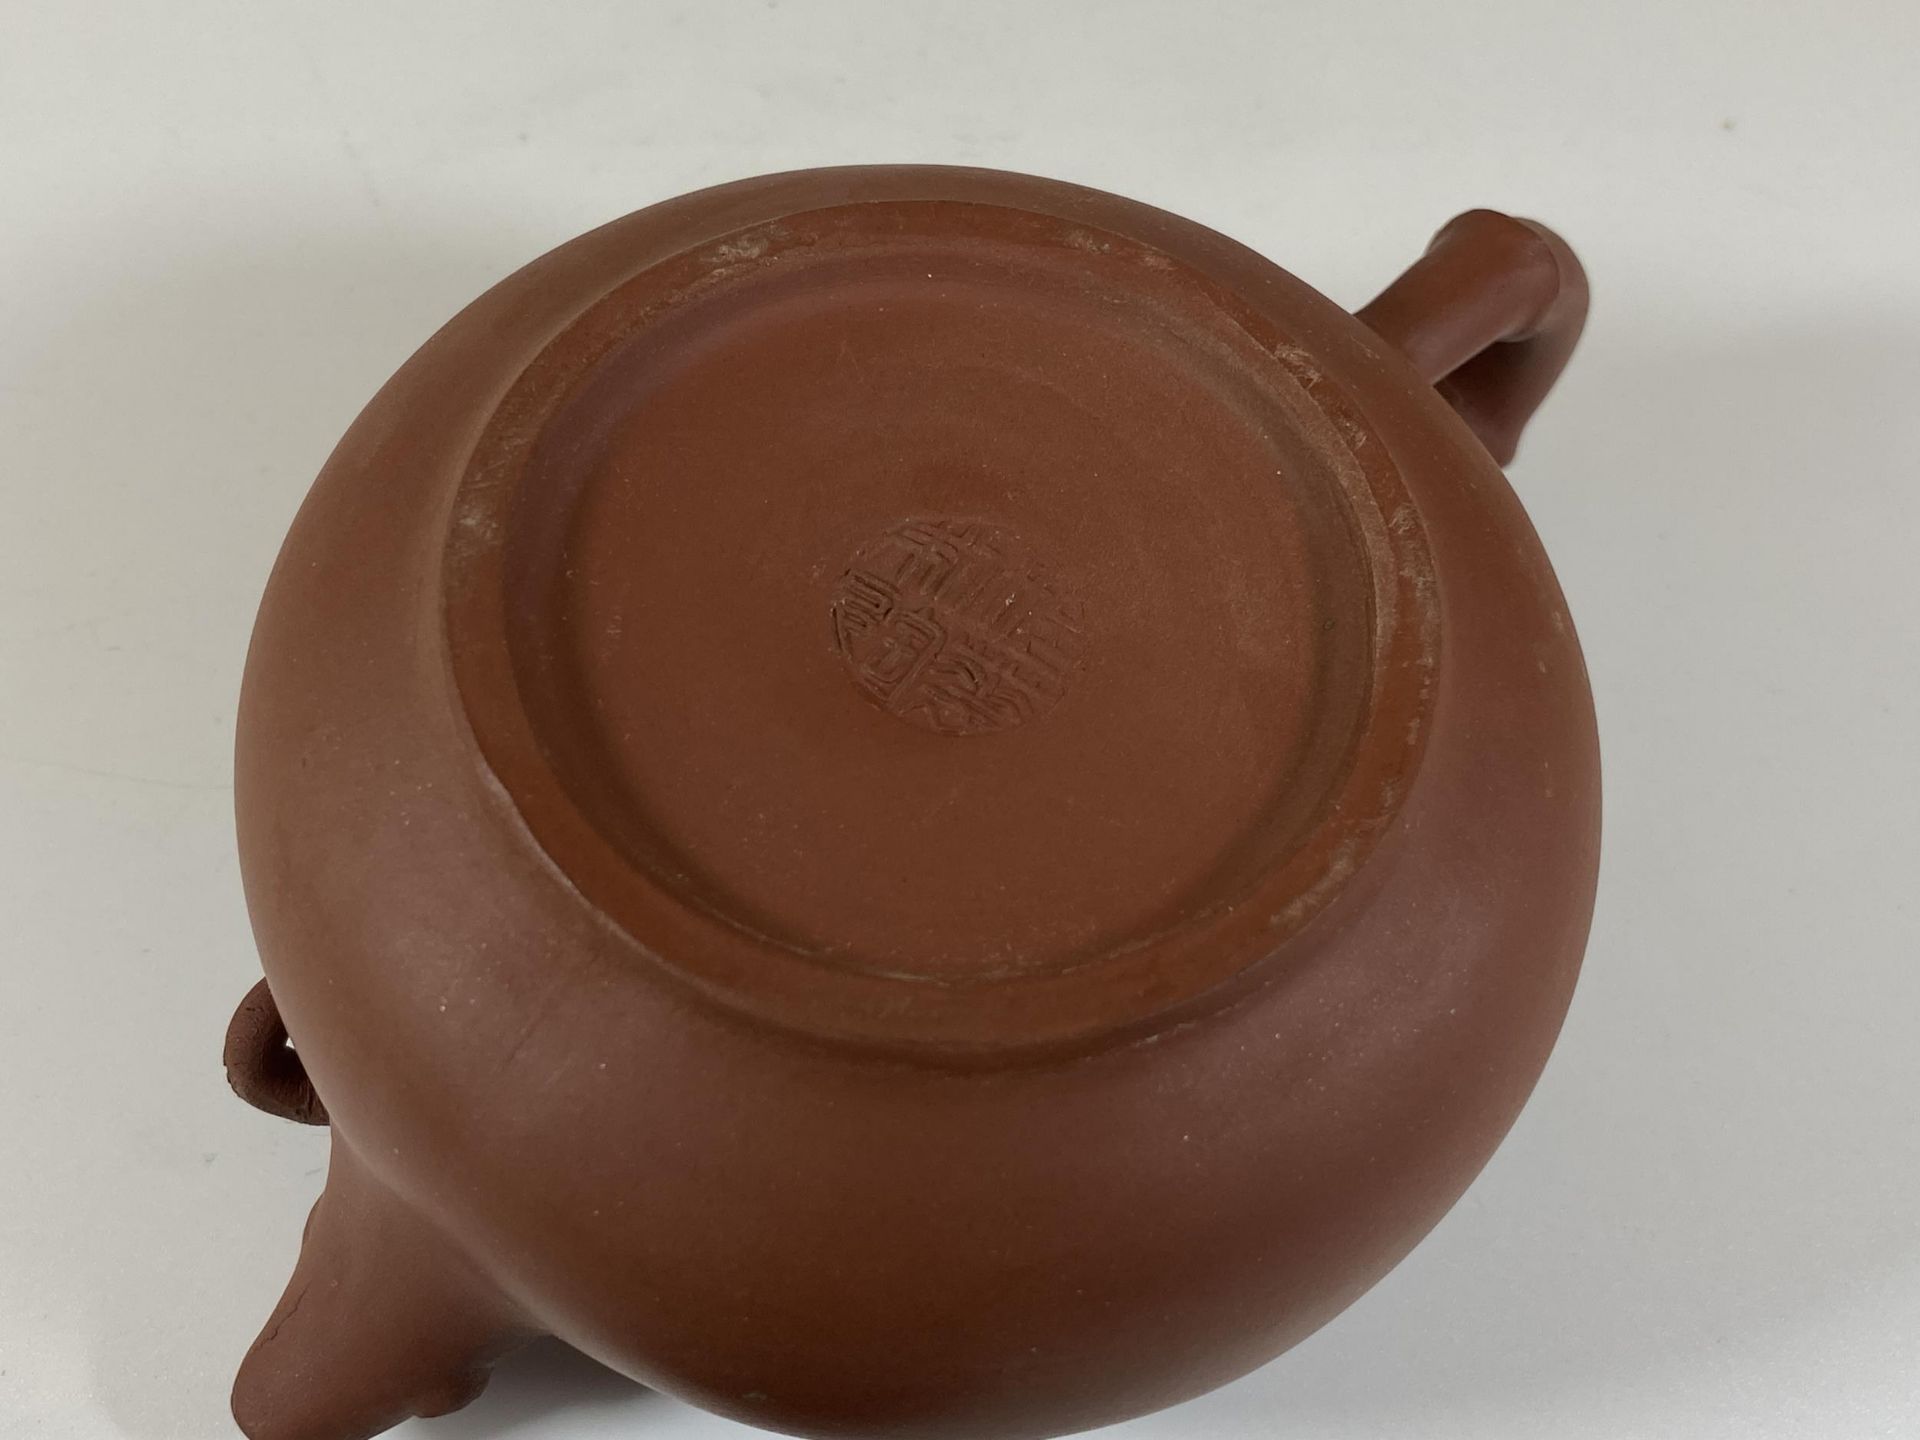 A CHINESE YIXING CLAY TEAPOT WITH FLORAL RELIEF MOULDED DESIGN, SEAL MARK TO BASE AND LID INNER, - Image 4 of 6